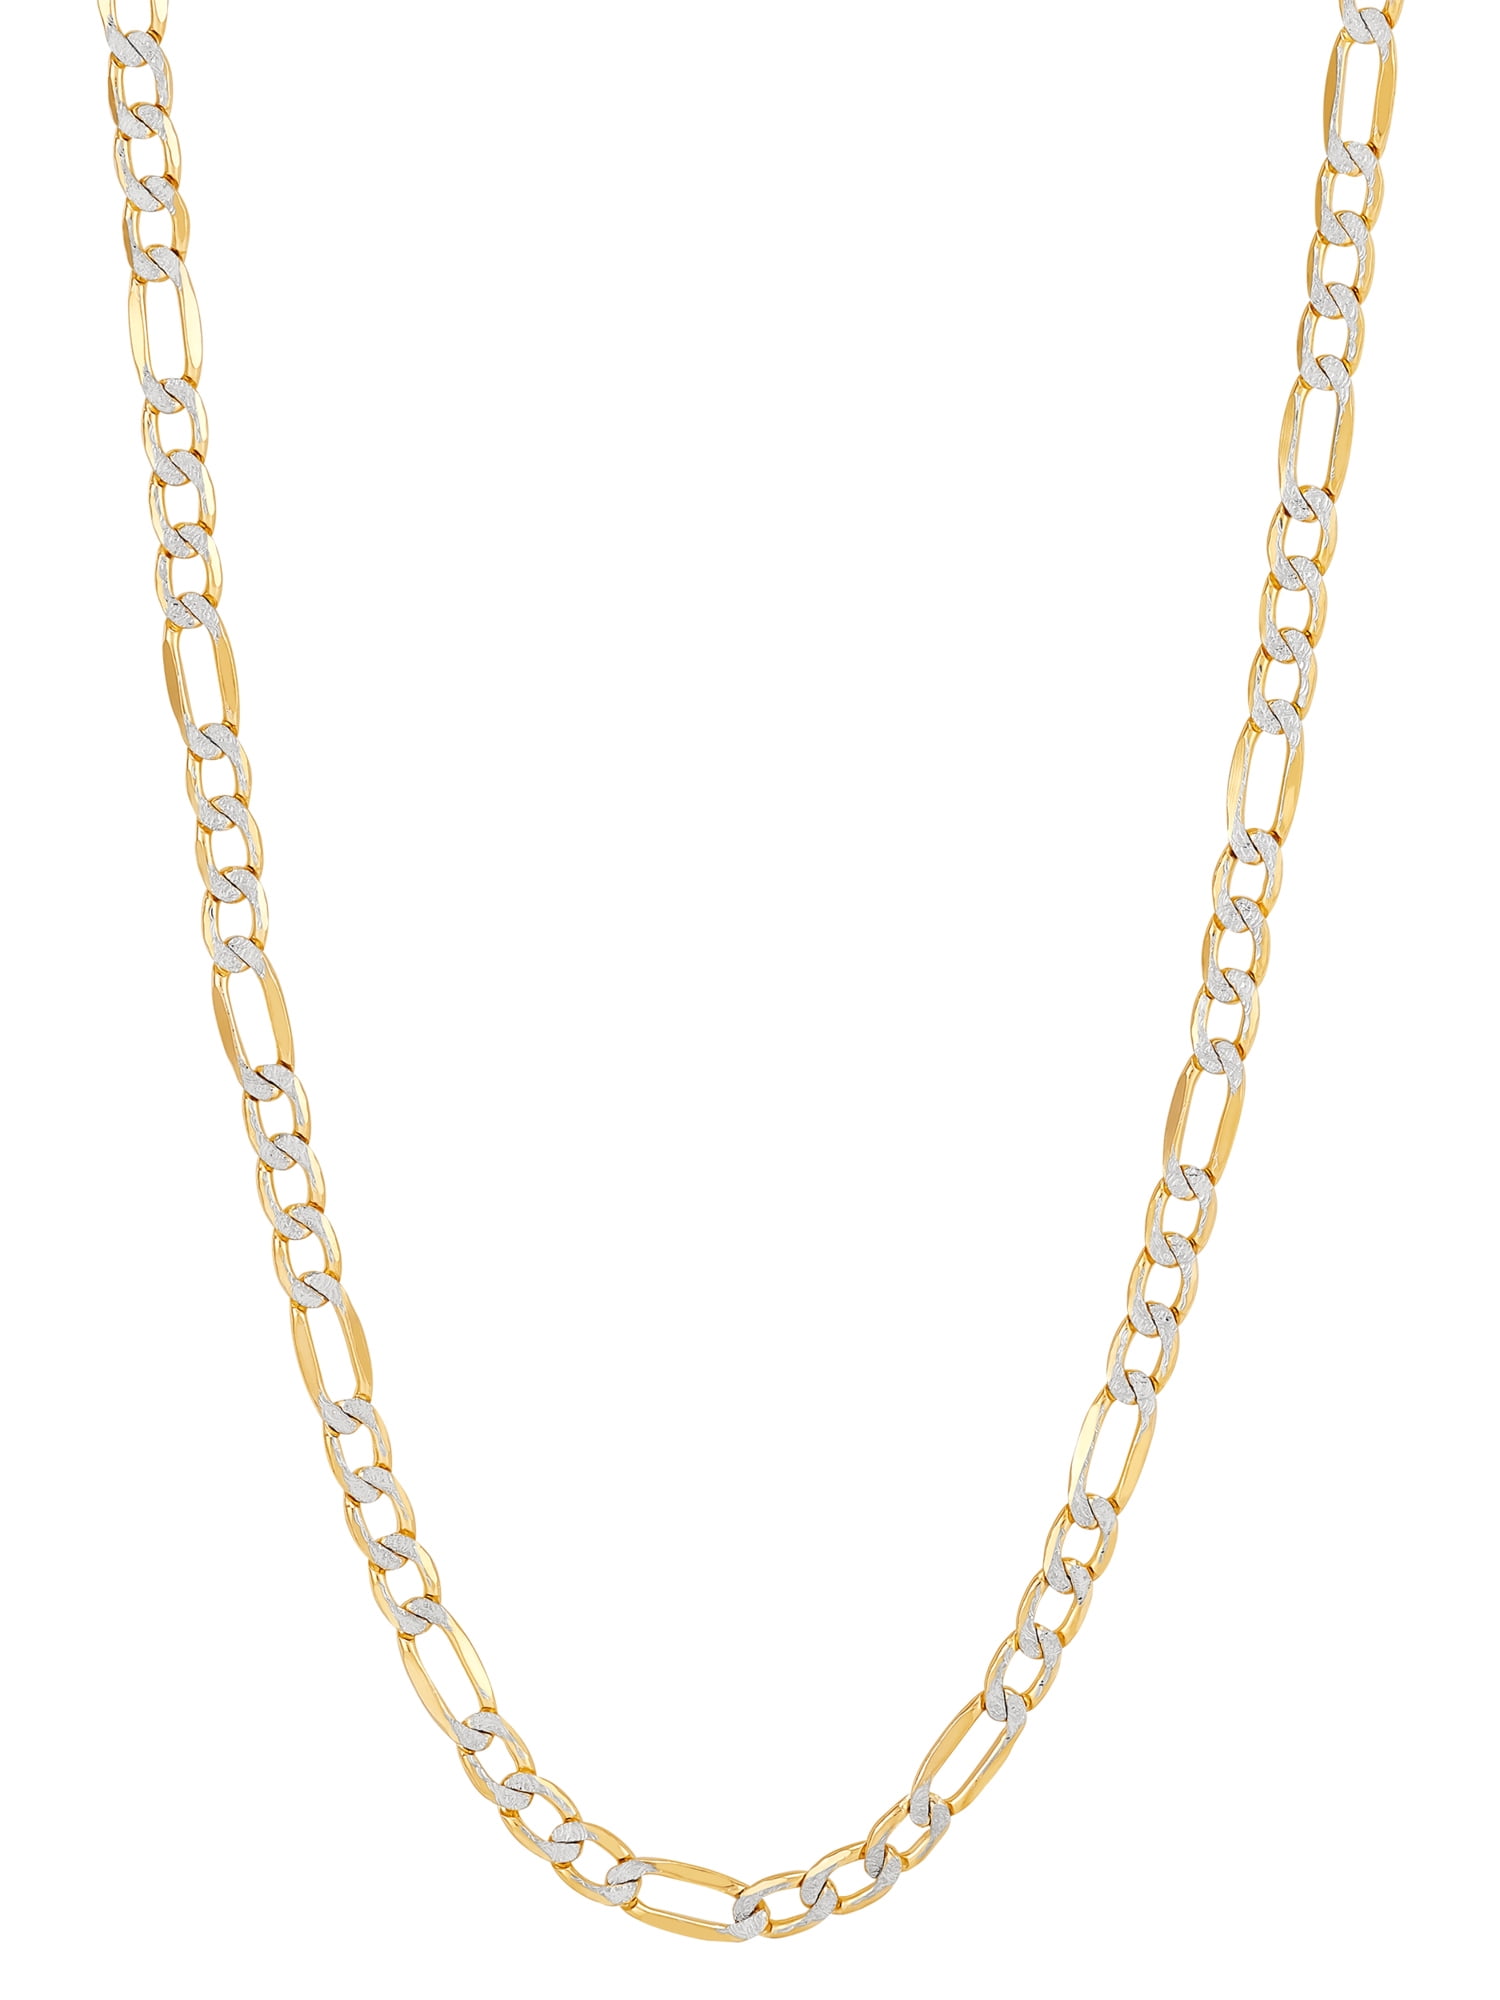 gold filled Figero chain 16"ins 18"ins 20"ins 22"ins 24"ins 26"ins 28"ins 30"ins 